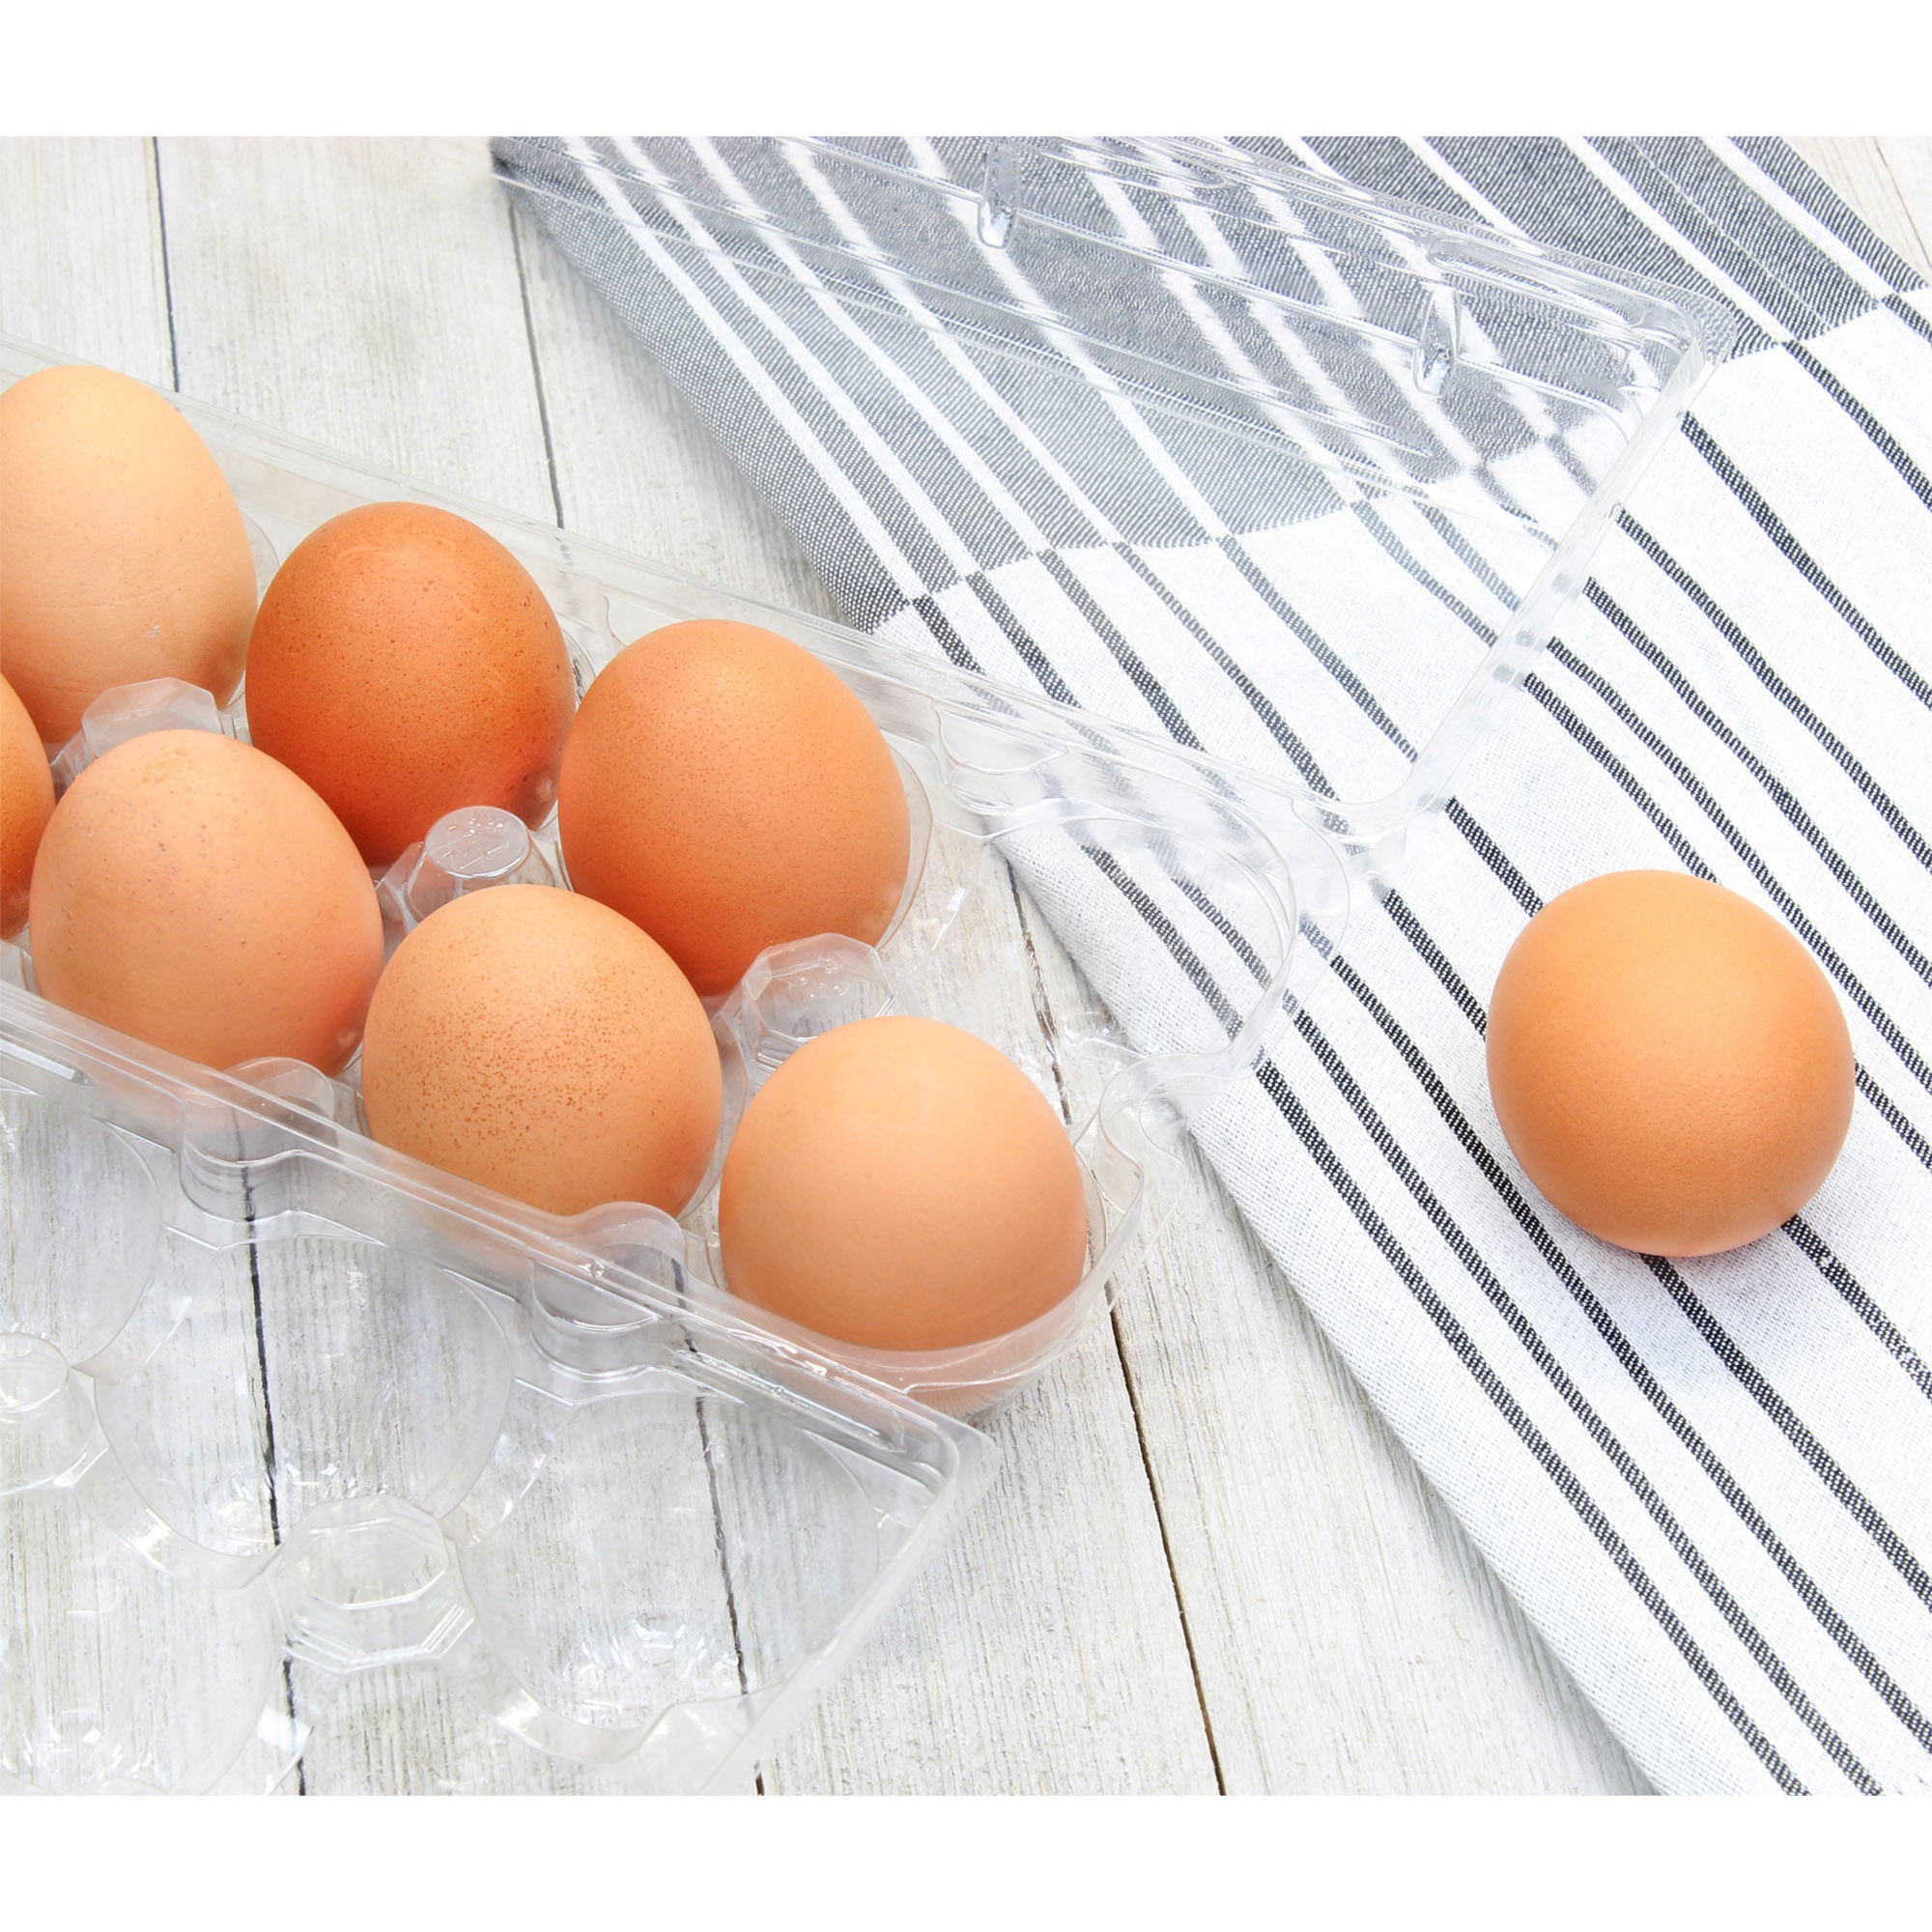 Clear Plastic Egg Cartons (20-Pack); Tri-Fold Containers for One